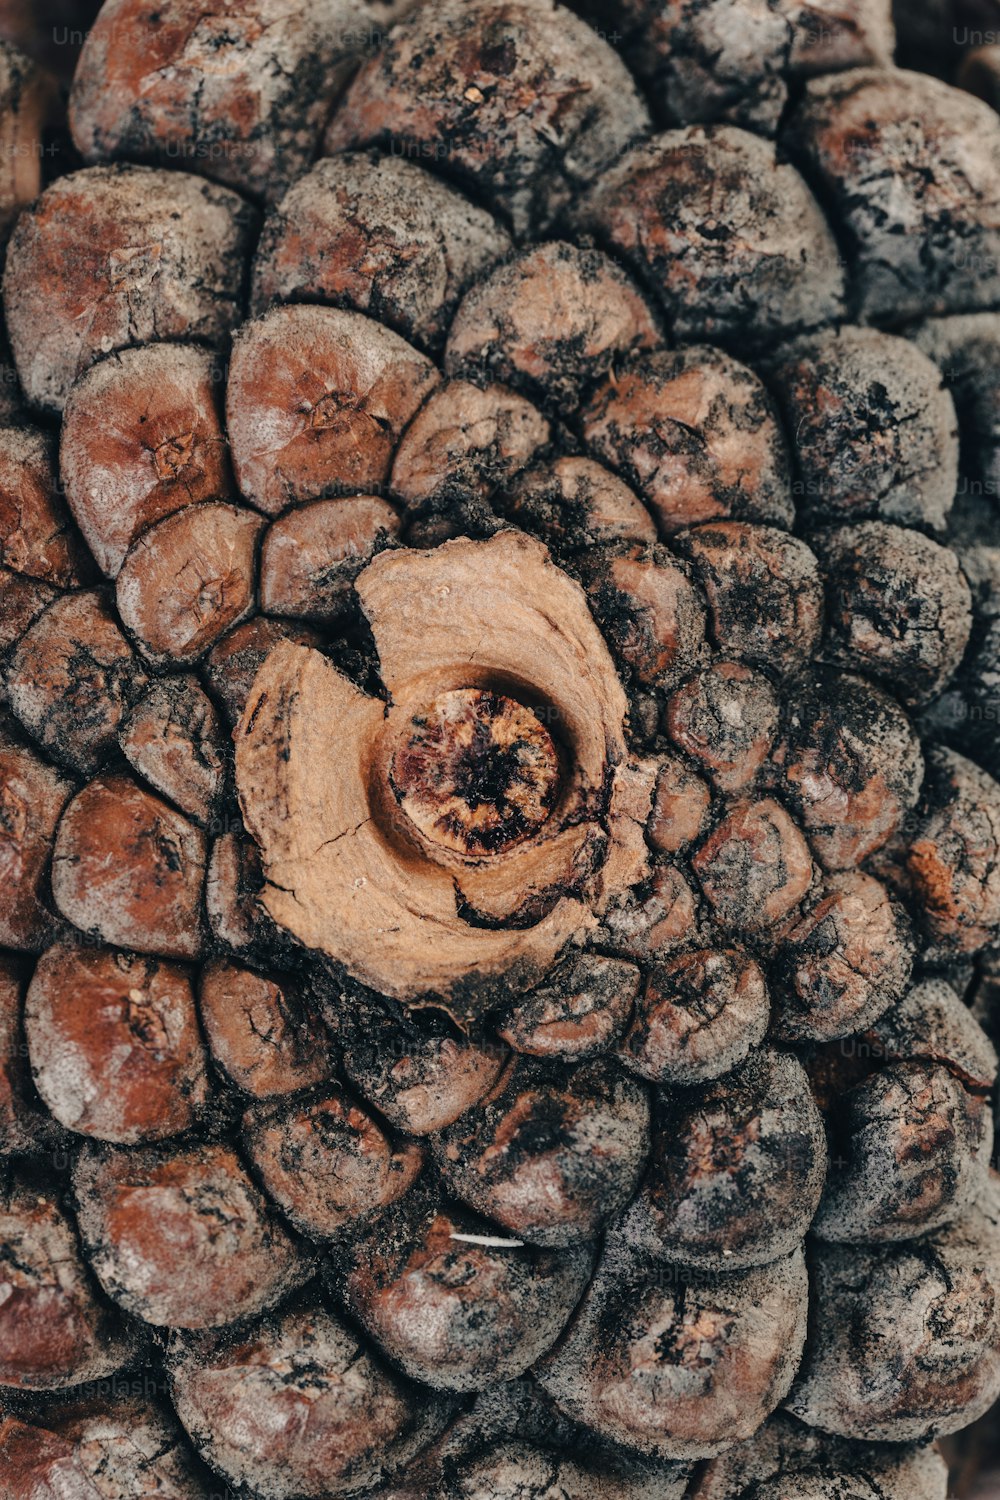 a close up of a pine cone with a nut in the center